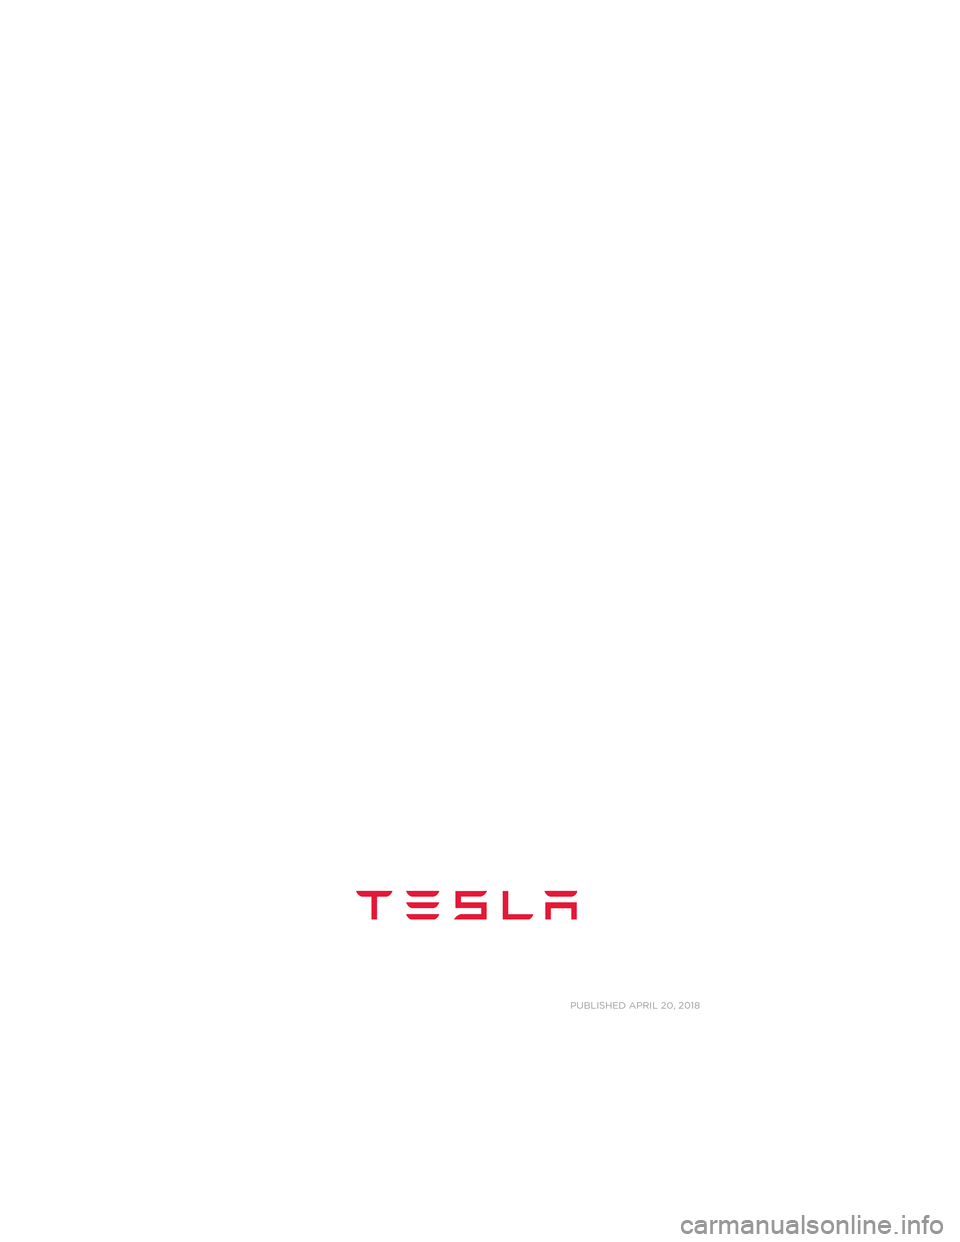 TESLA MODEL 3 2018  Owners Manual PUBLISHED APRIL 20, 2018
Model S Quick Guide - NA Rev C.book  Page
 2  Wednesday, December 18, 2013  12:40 PM 